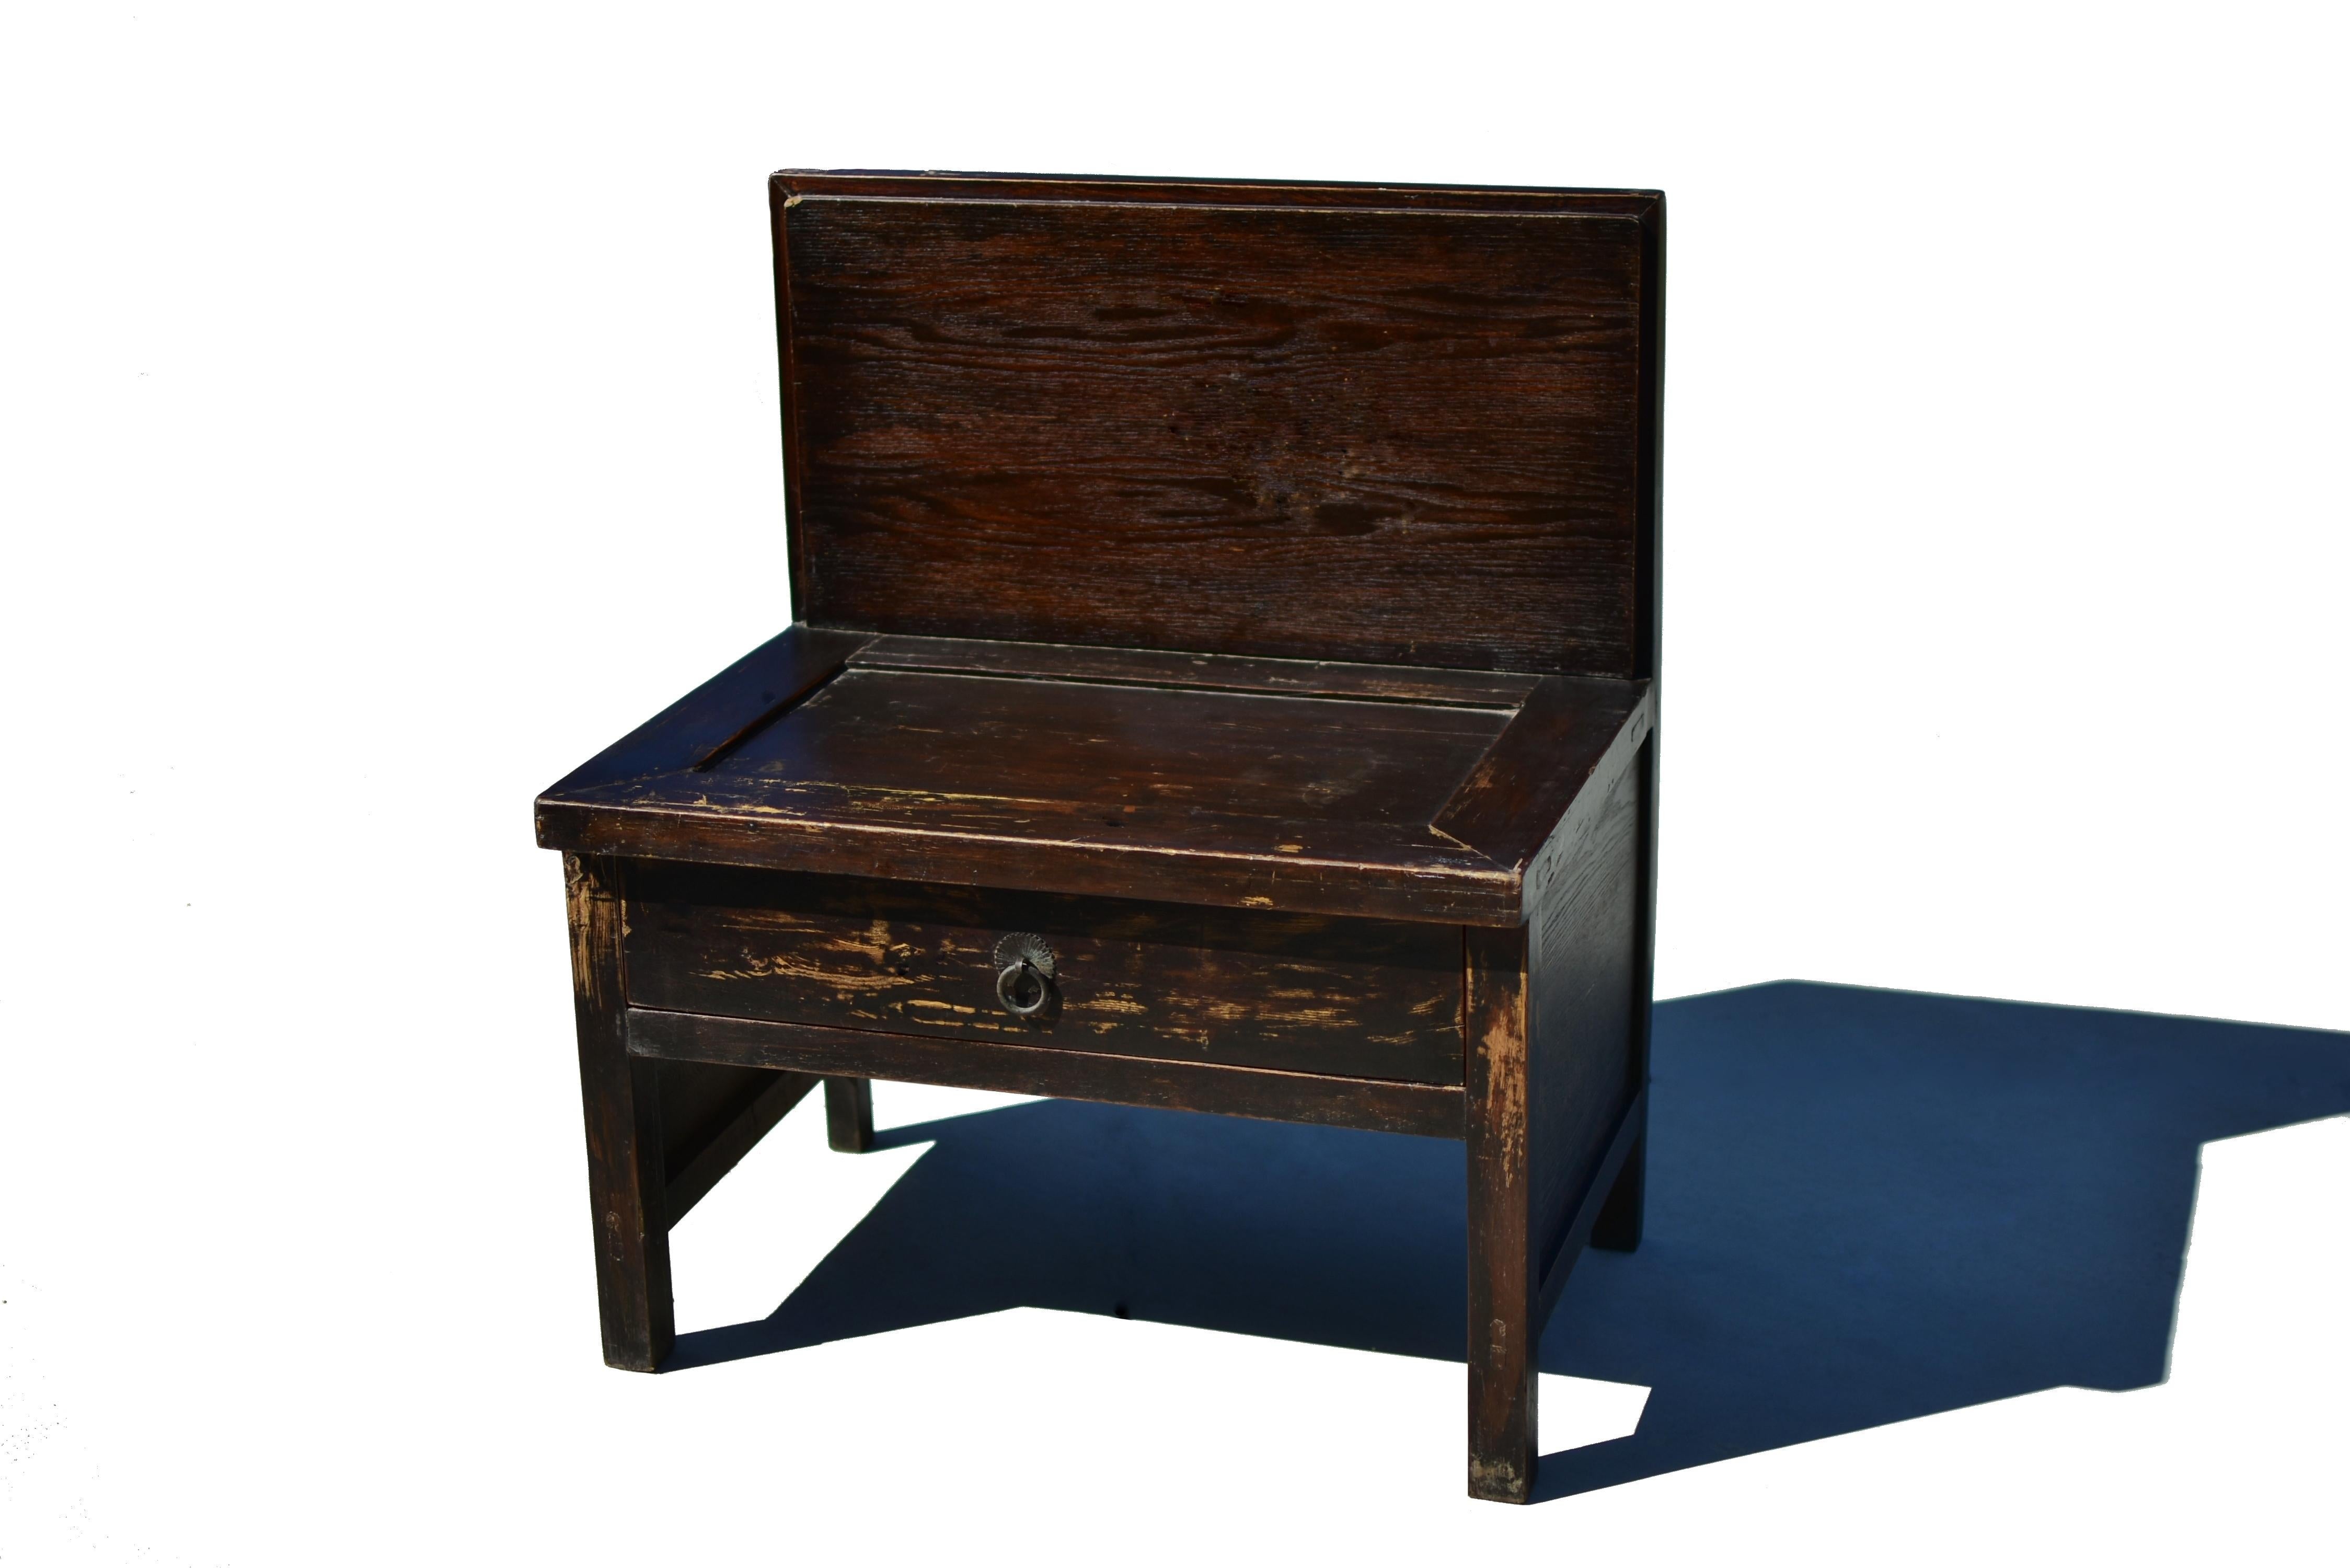 A solid wood chair with beautiful carved back. The chair is exceptionally wide and sturdy with a large drawer for storage. The seat is set in the 